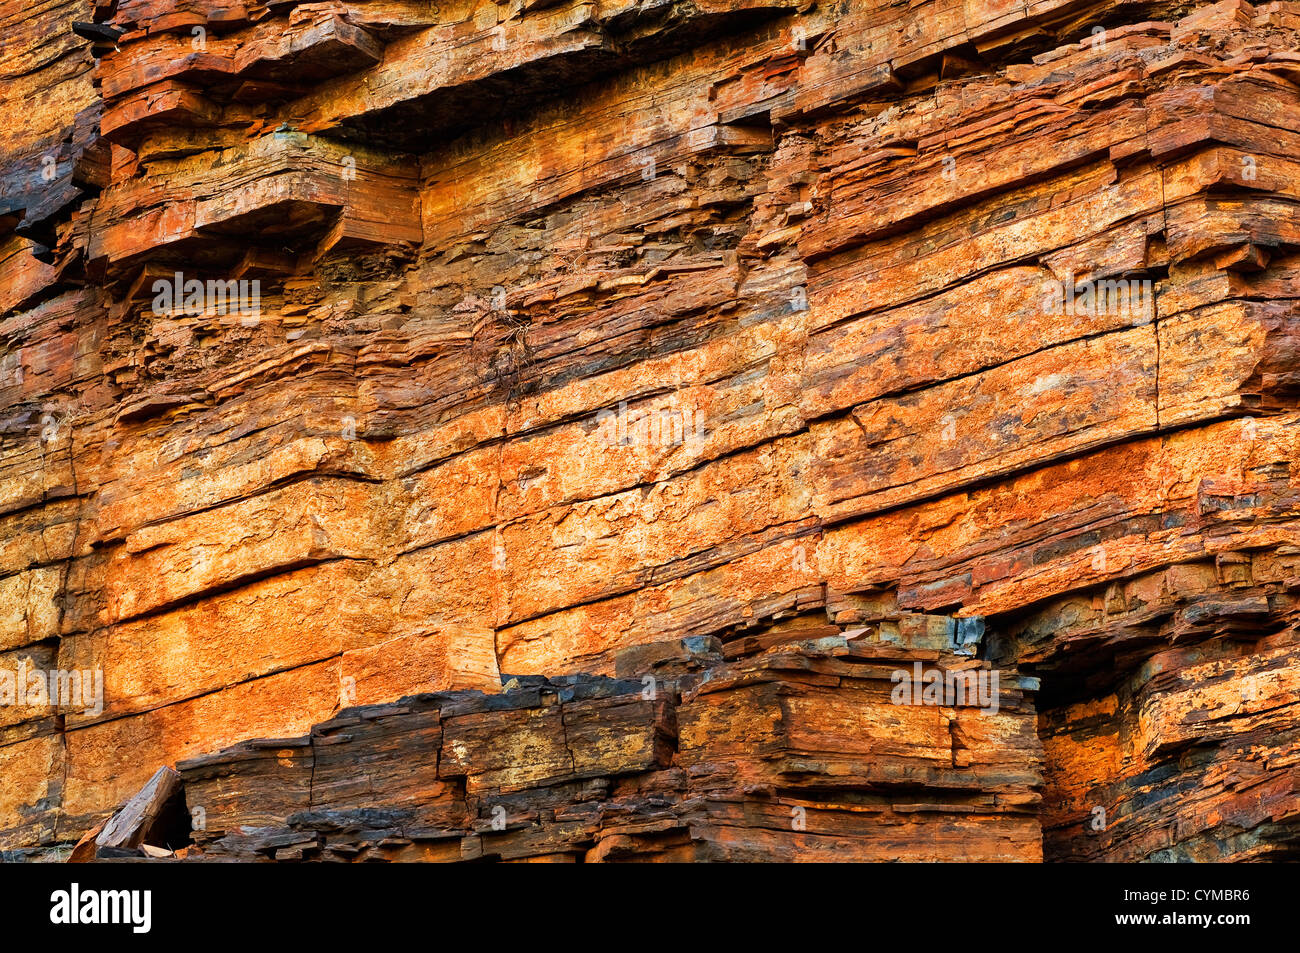 Farbige Felswand in Dales Gorge. Stockfoto